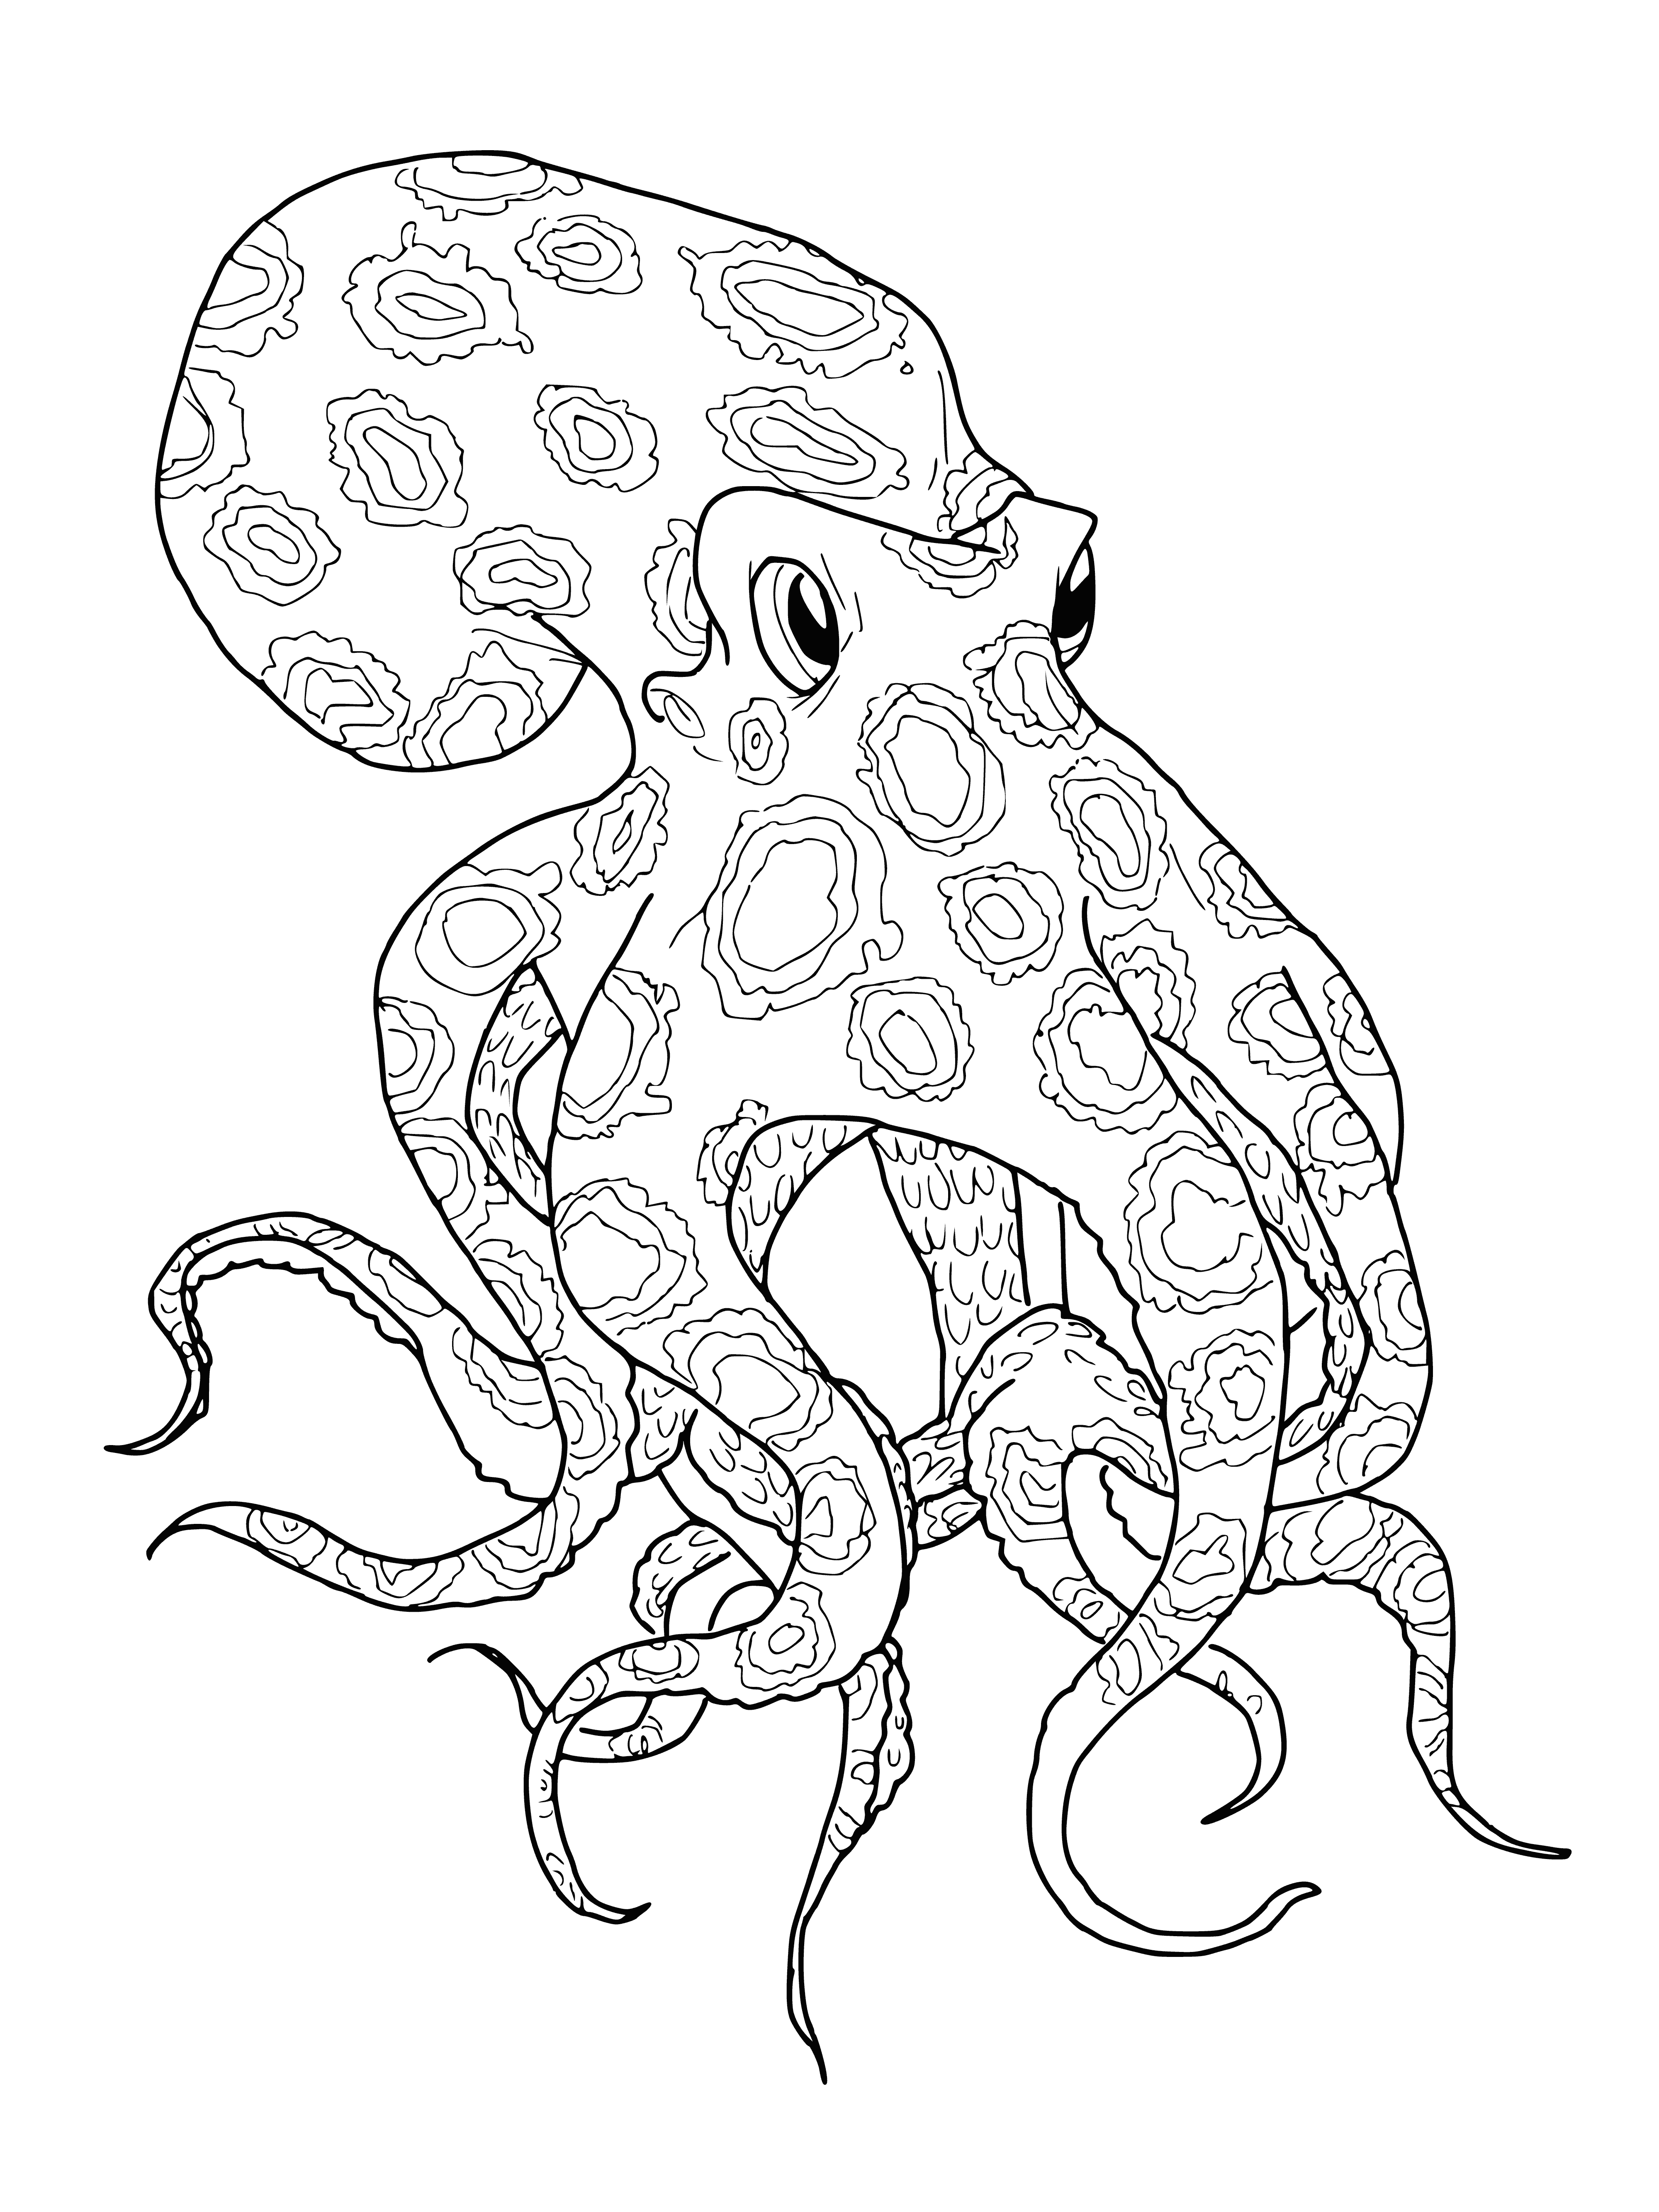 coloring page: A large blue octopus and small fish swim among a peaceful blue-green coral.